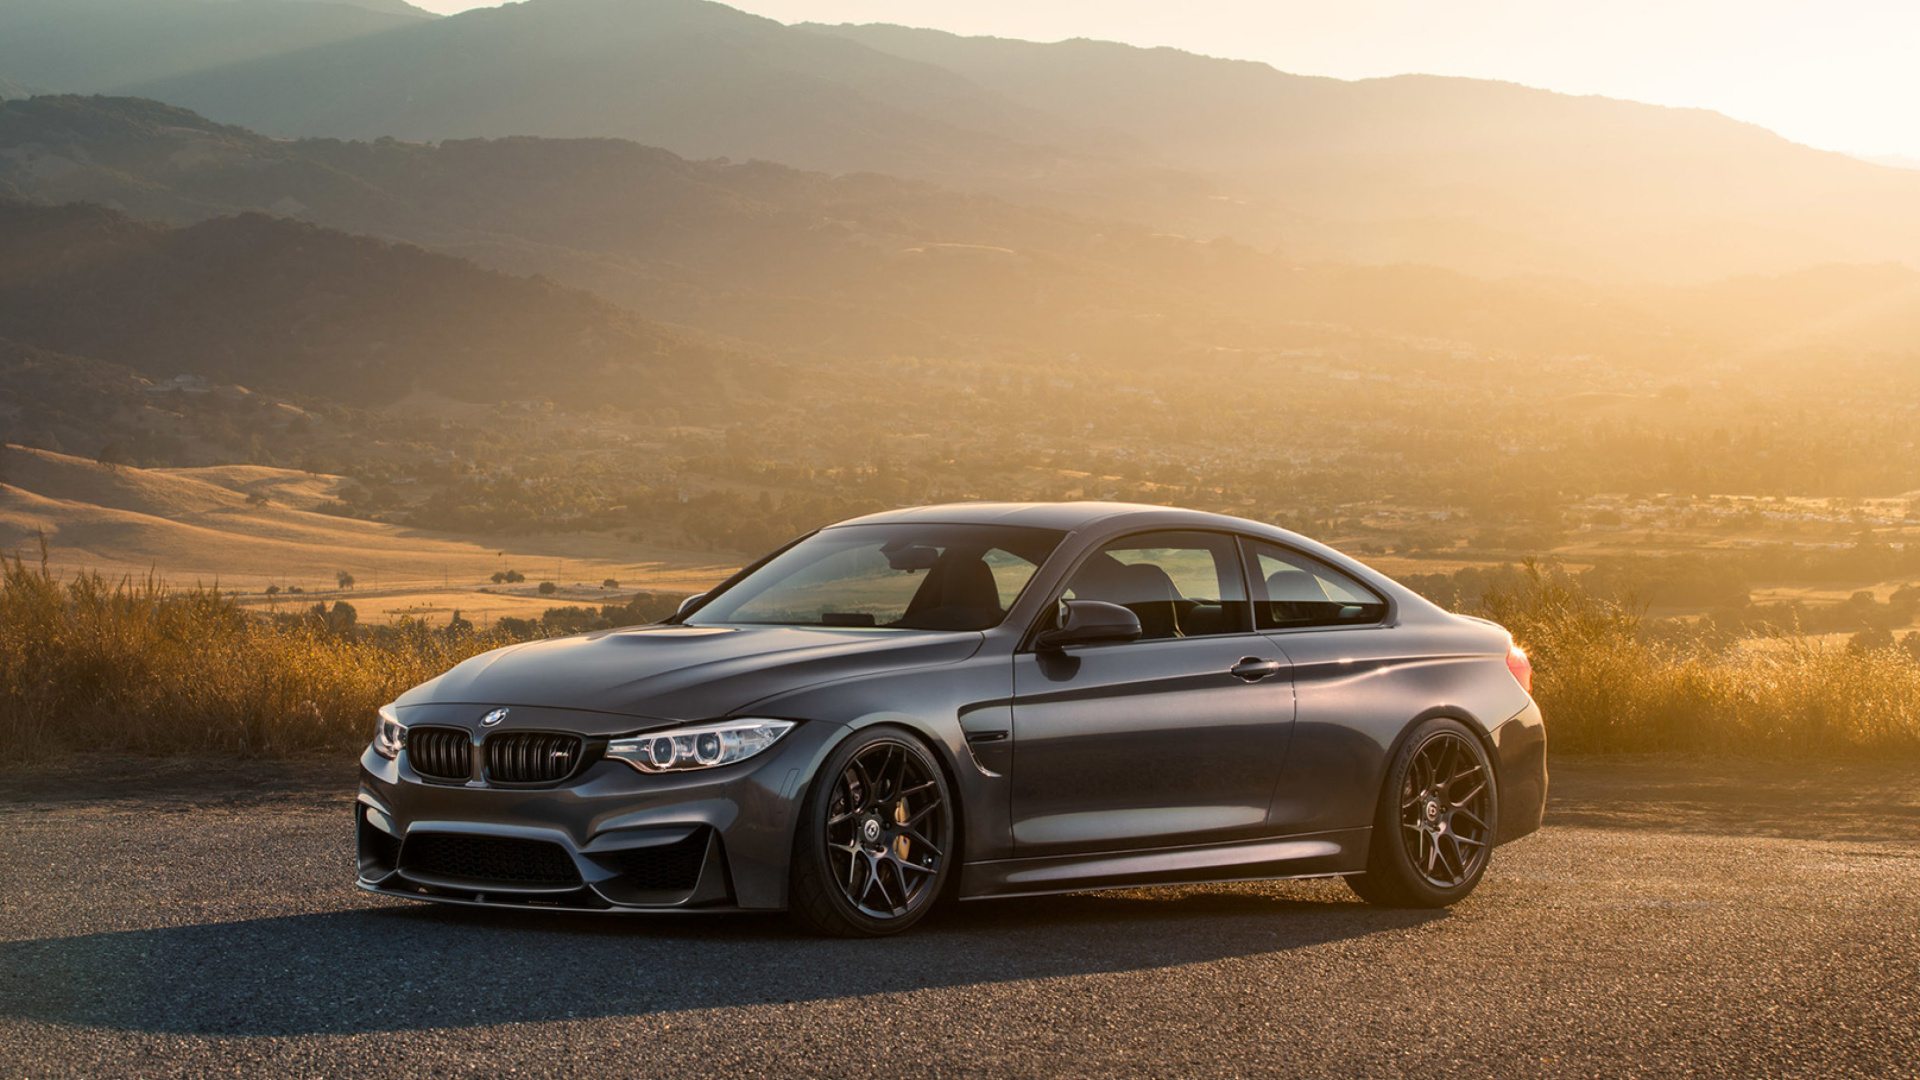 BMW 430i Coupe wallpaper 1920x1080